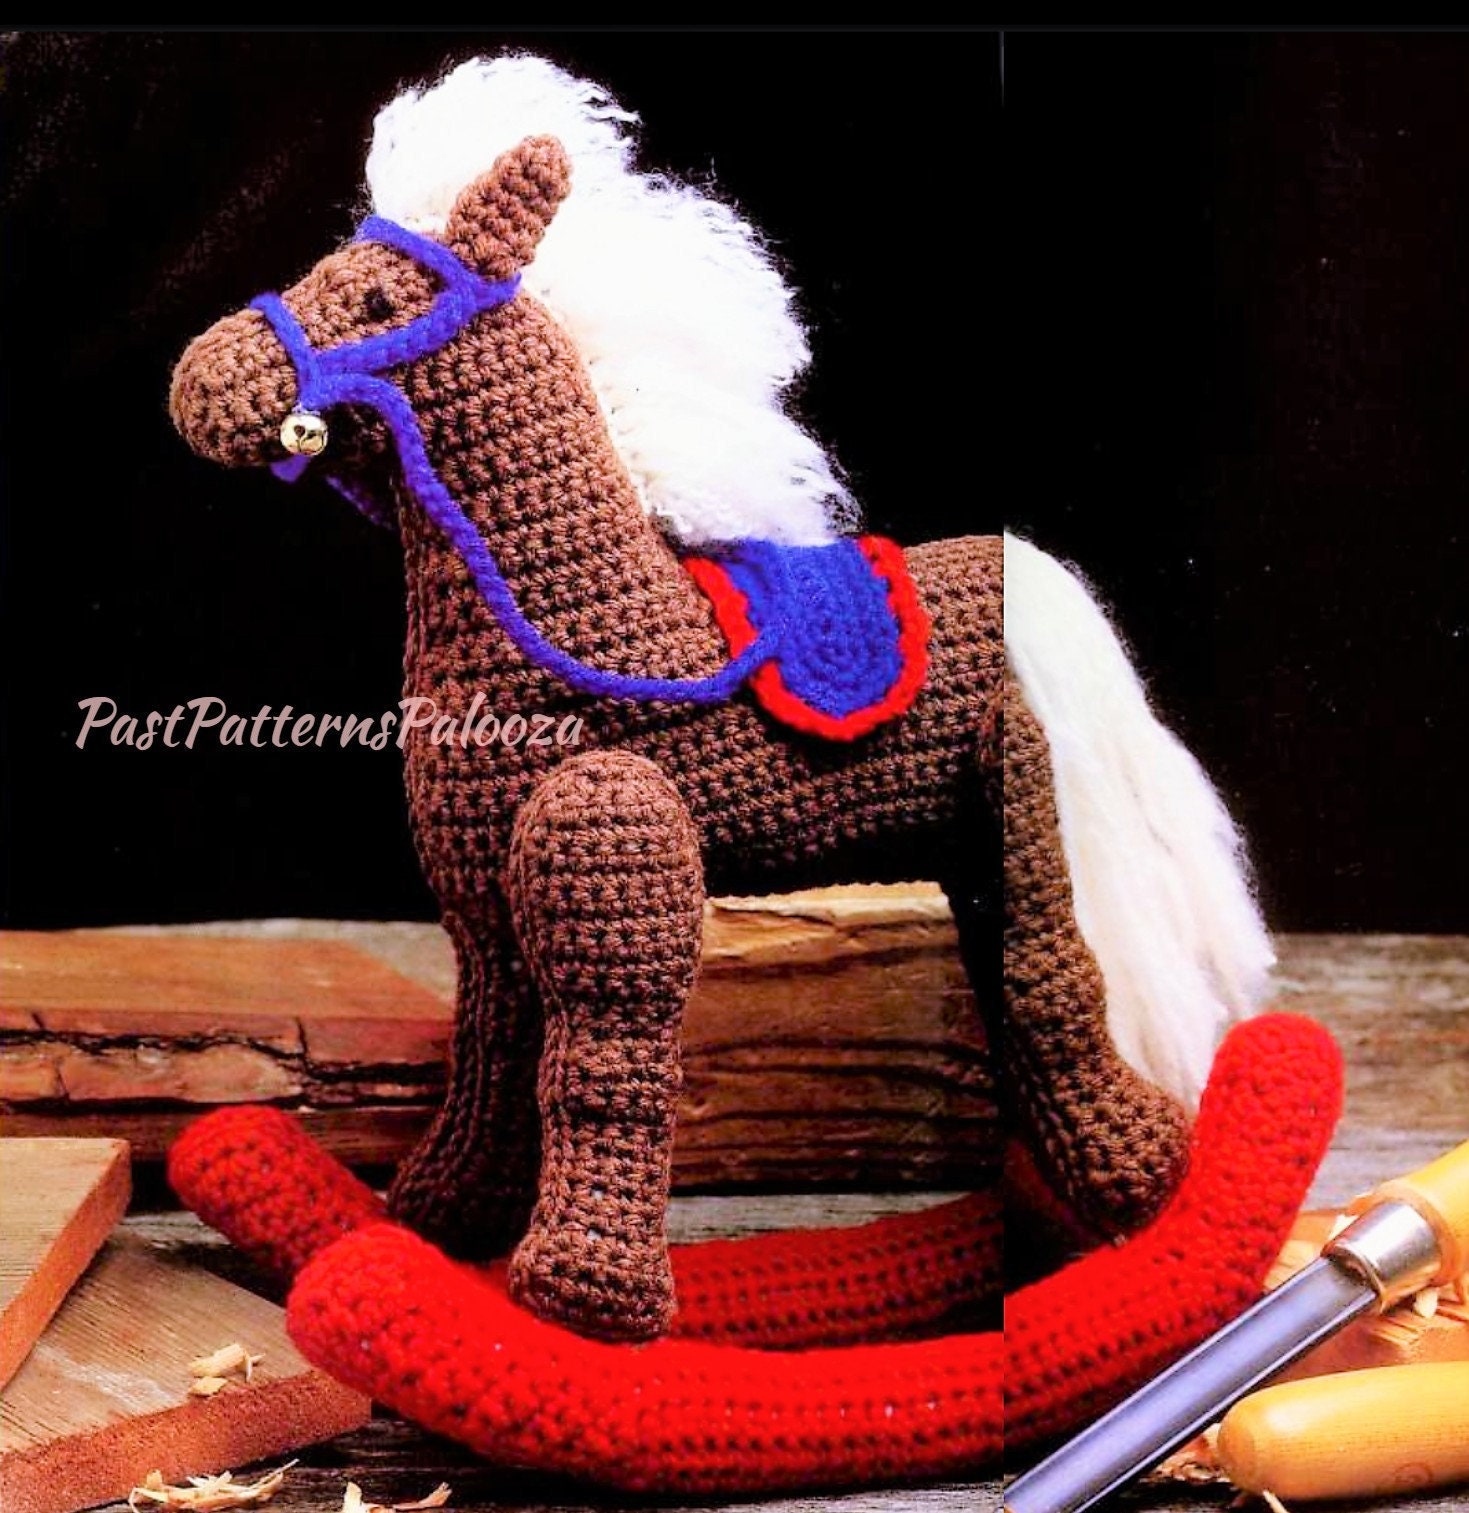 Vintage Toy Crochet Pattern 3 Sizes of Cuddly Horse With blanket & Bridle!